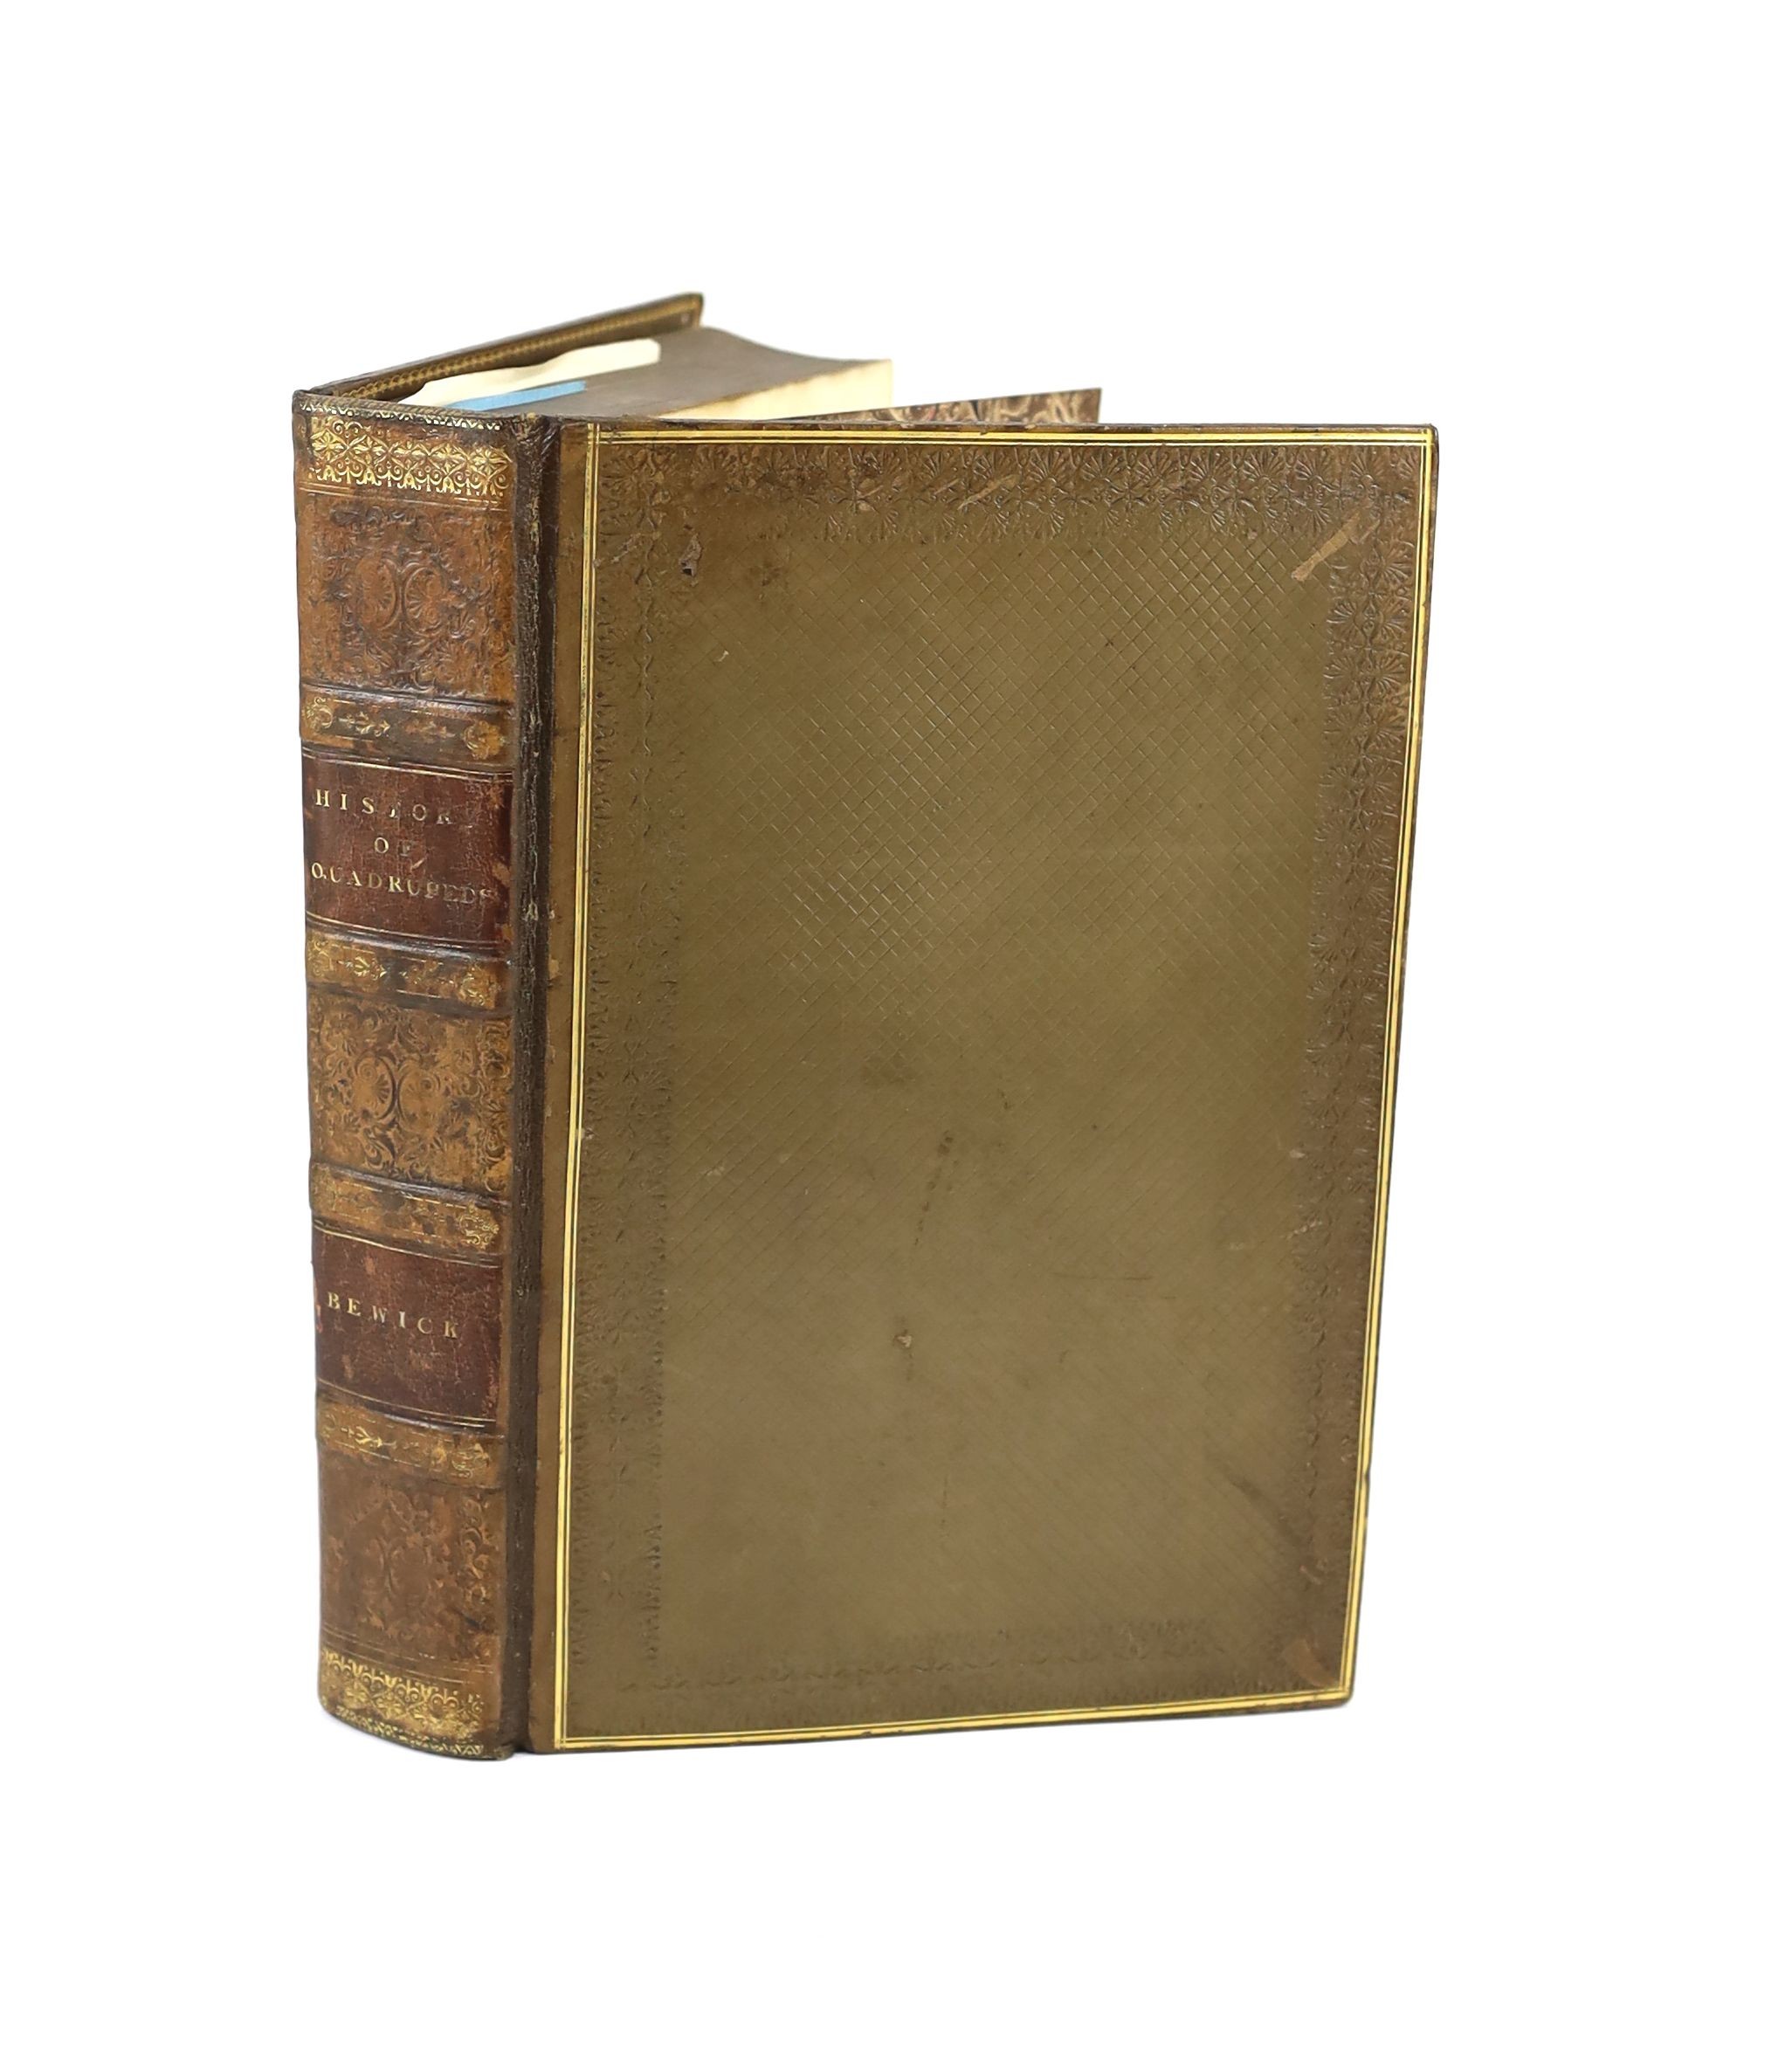 Bewick, Thomas - A General History of Quadrupeds, 7th edition, 8vo, diced calf rebacked, Newcastle, 1820